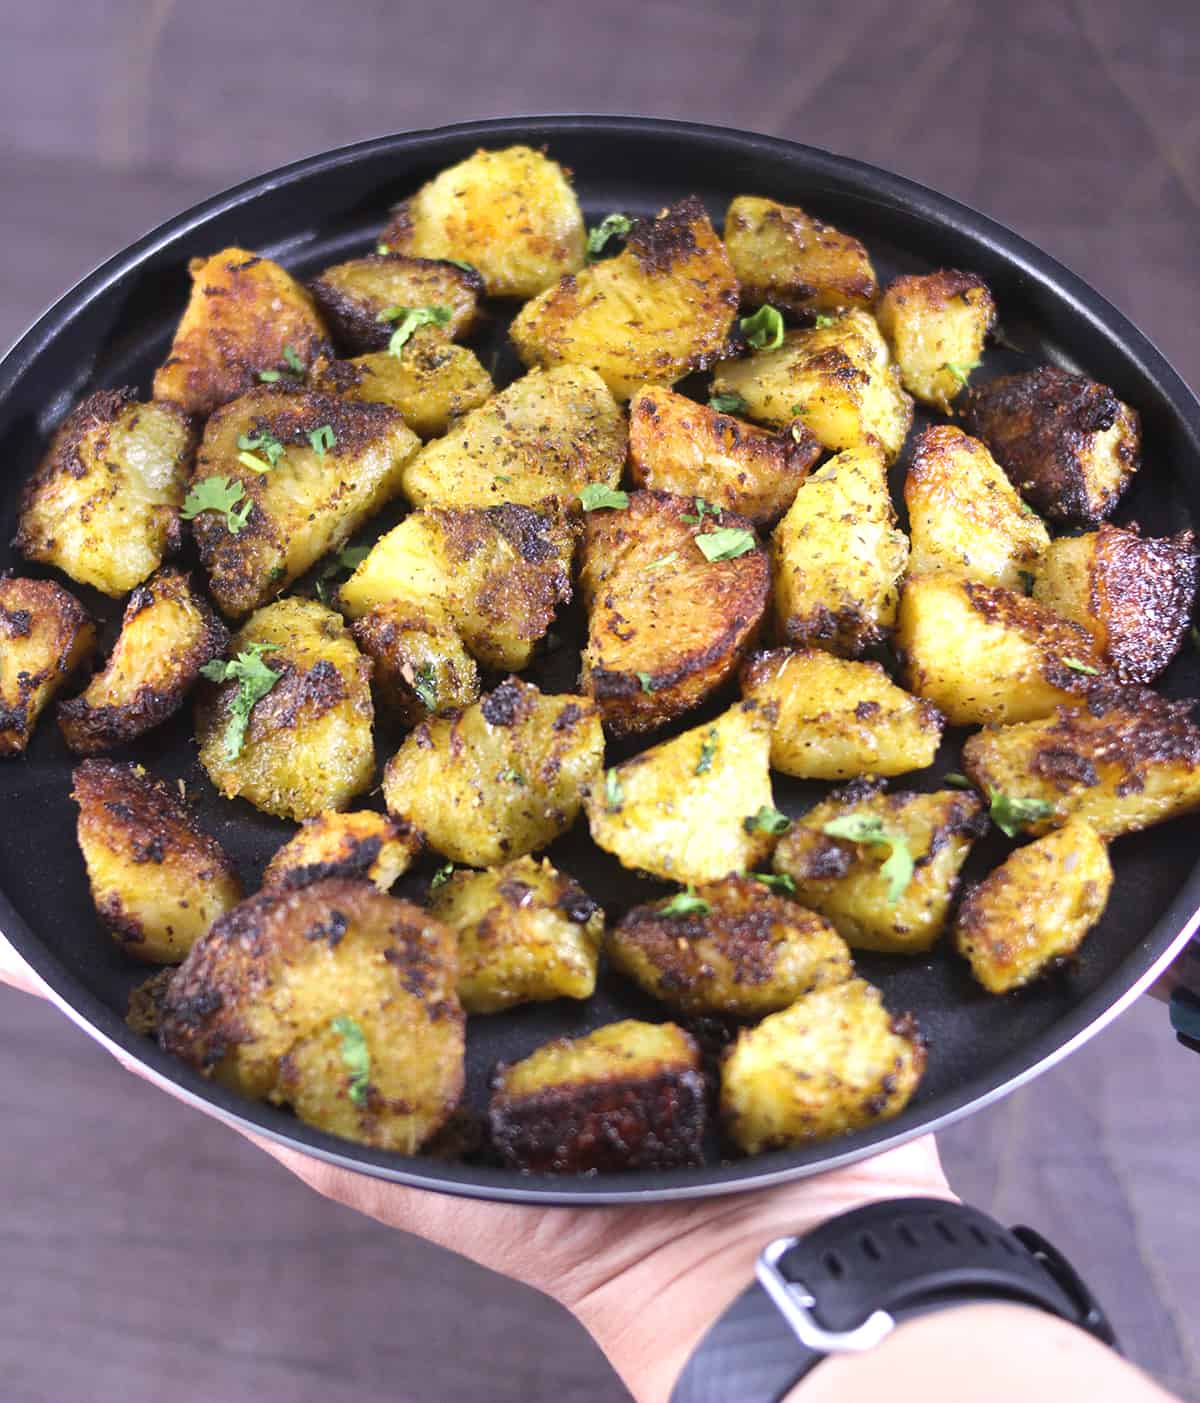 Lemon roasted potatoes | Greek flavored potato | Herbed potatoes with garlic and butter. 